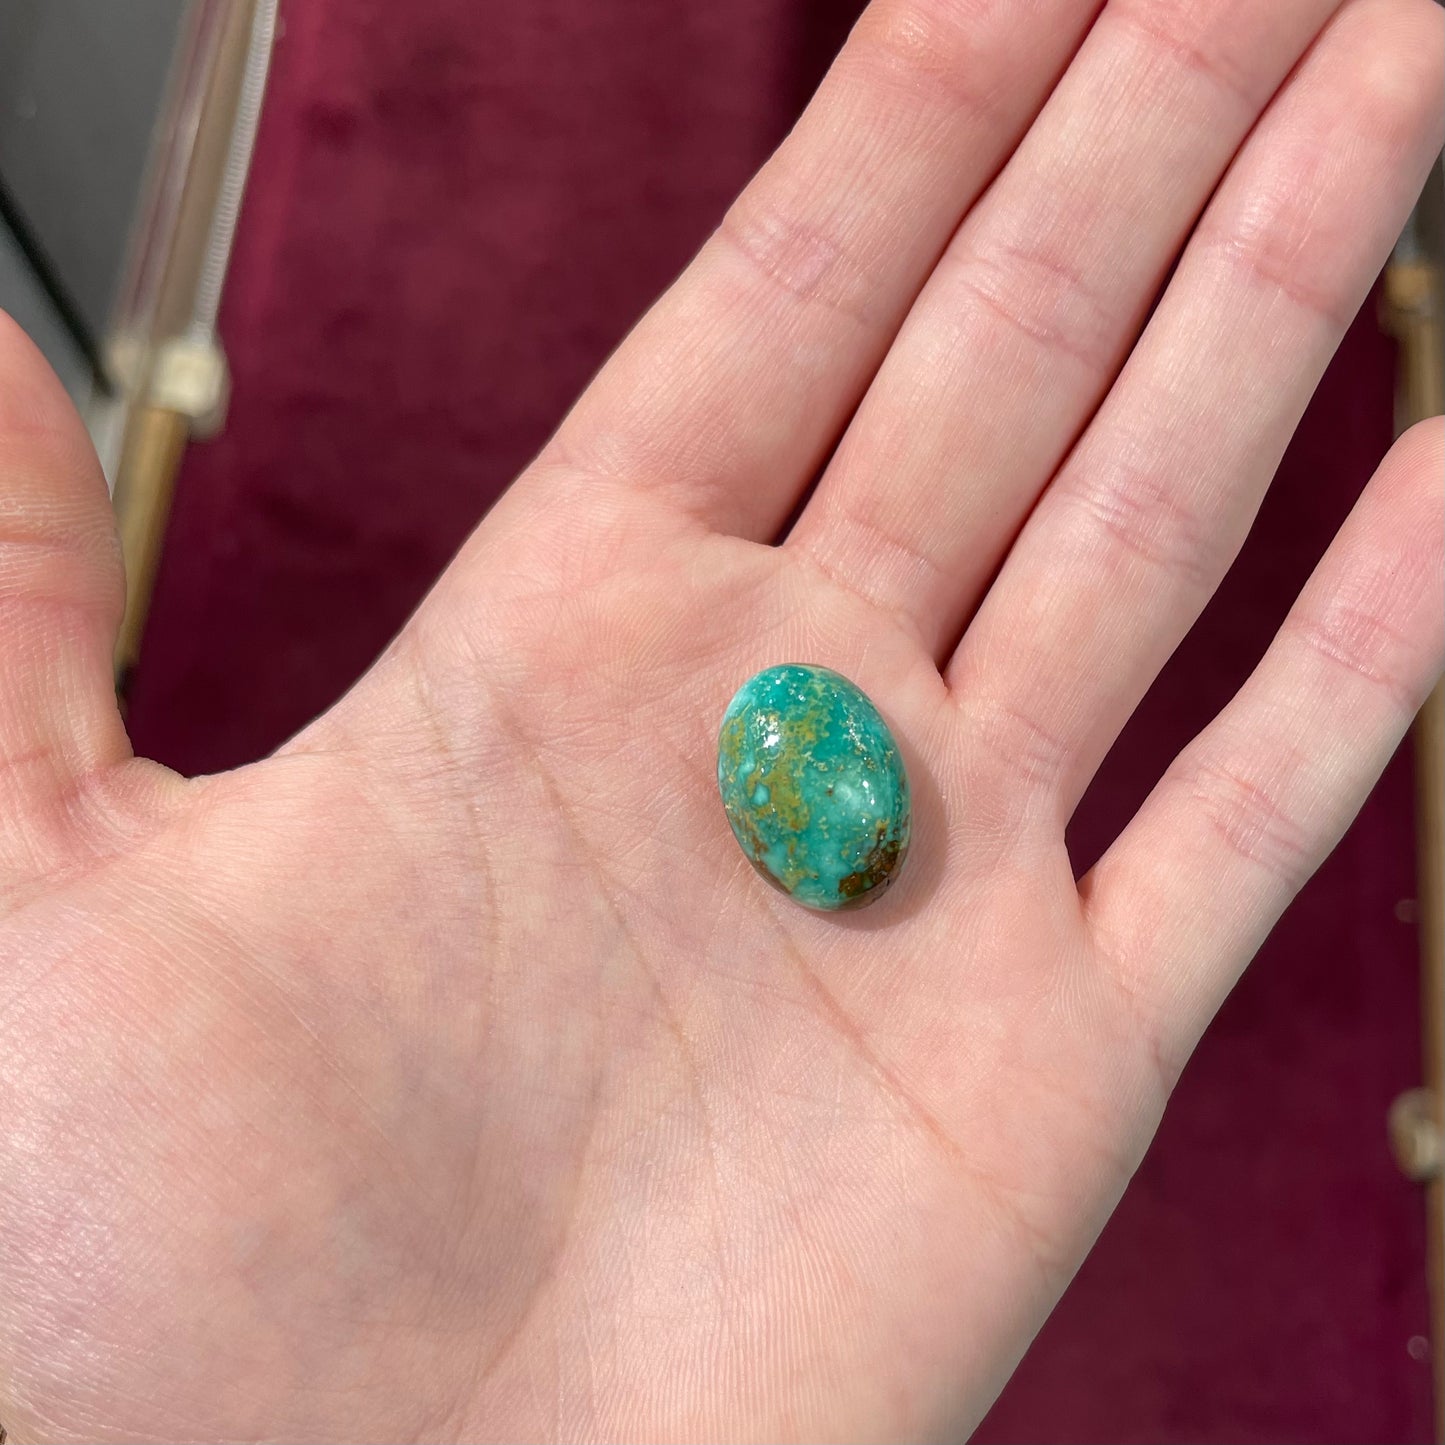 A loose, oval cabochon cut, green turquoise stone from Royston Mining District, Nevada.